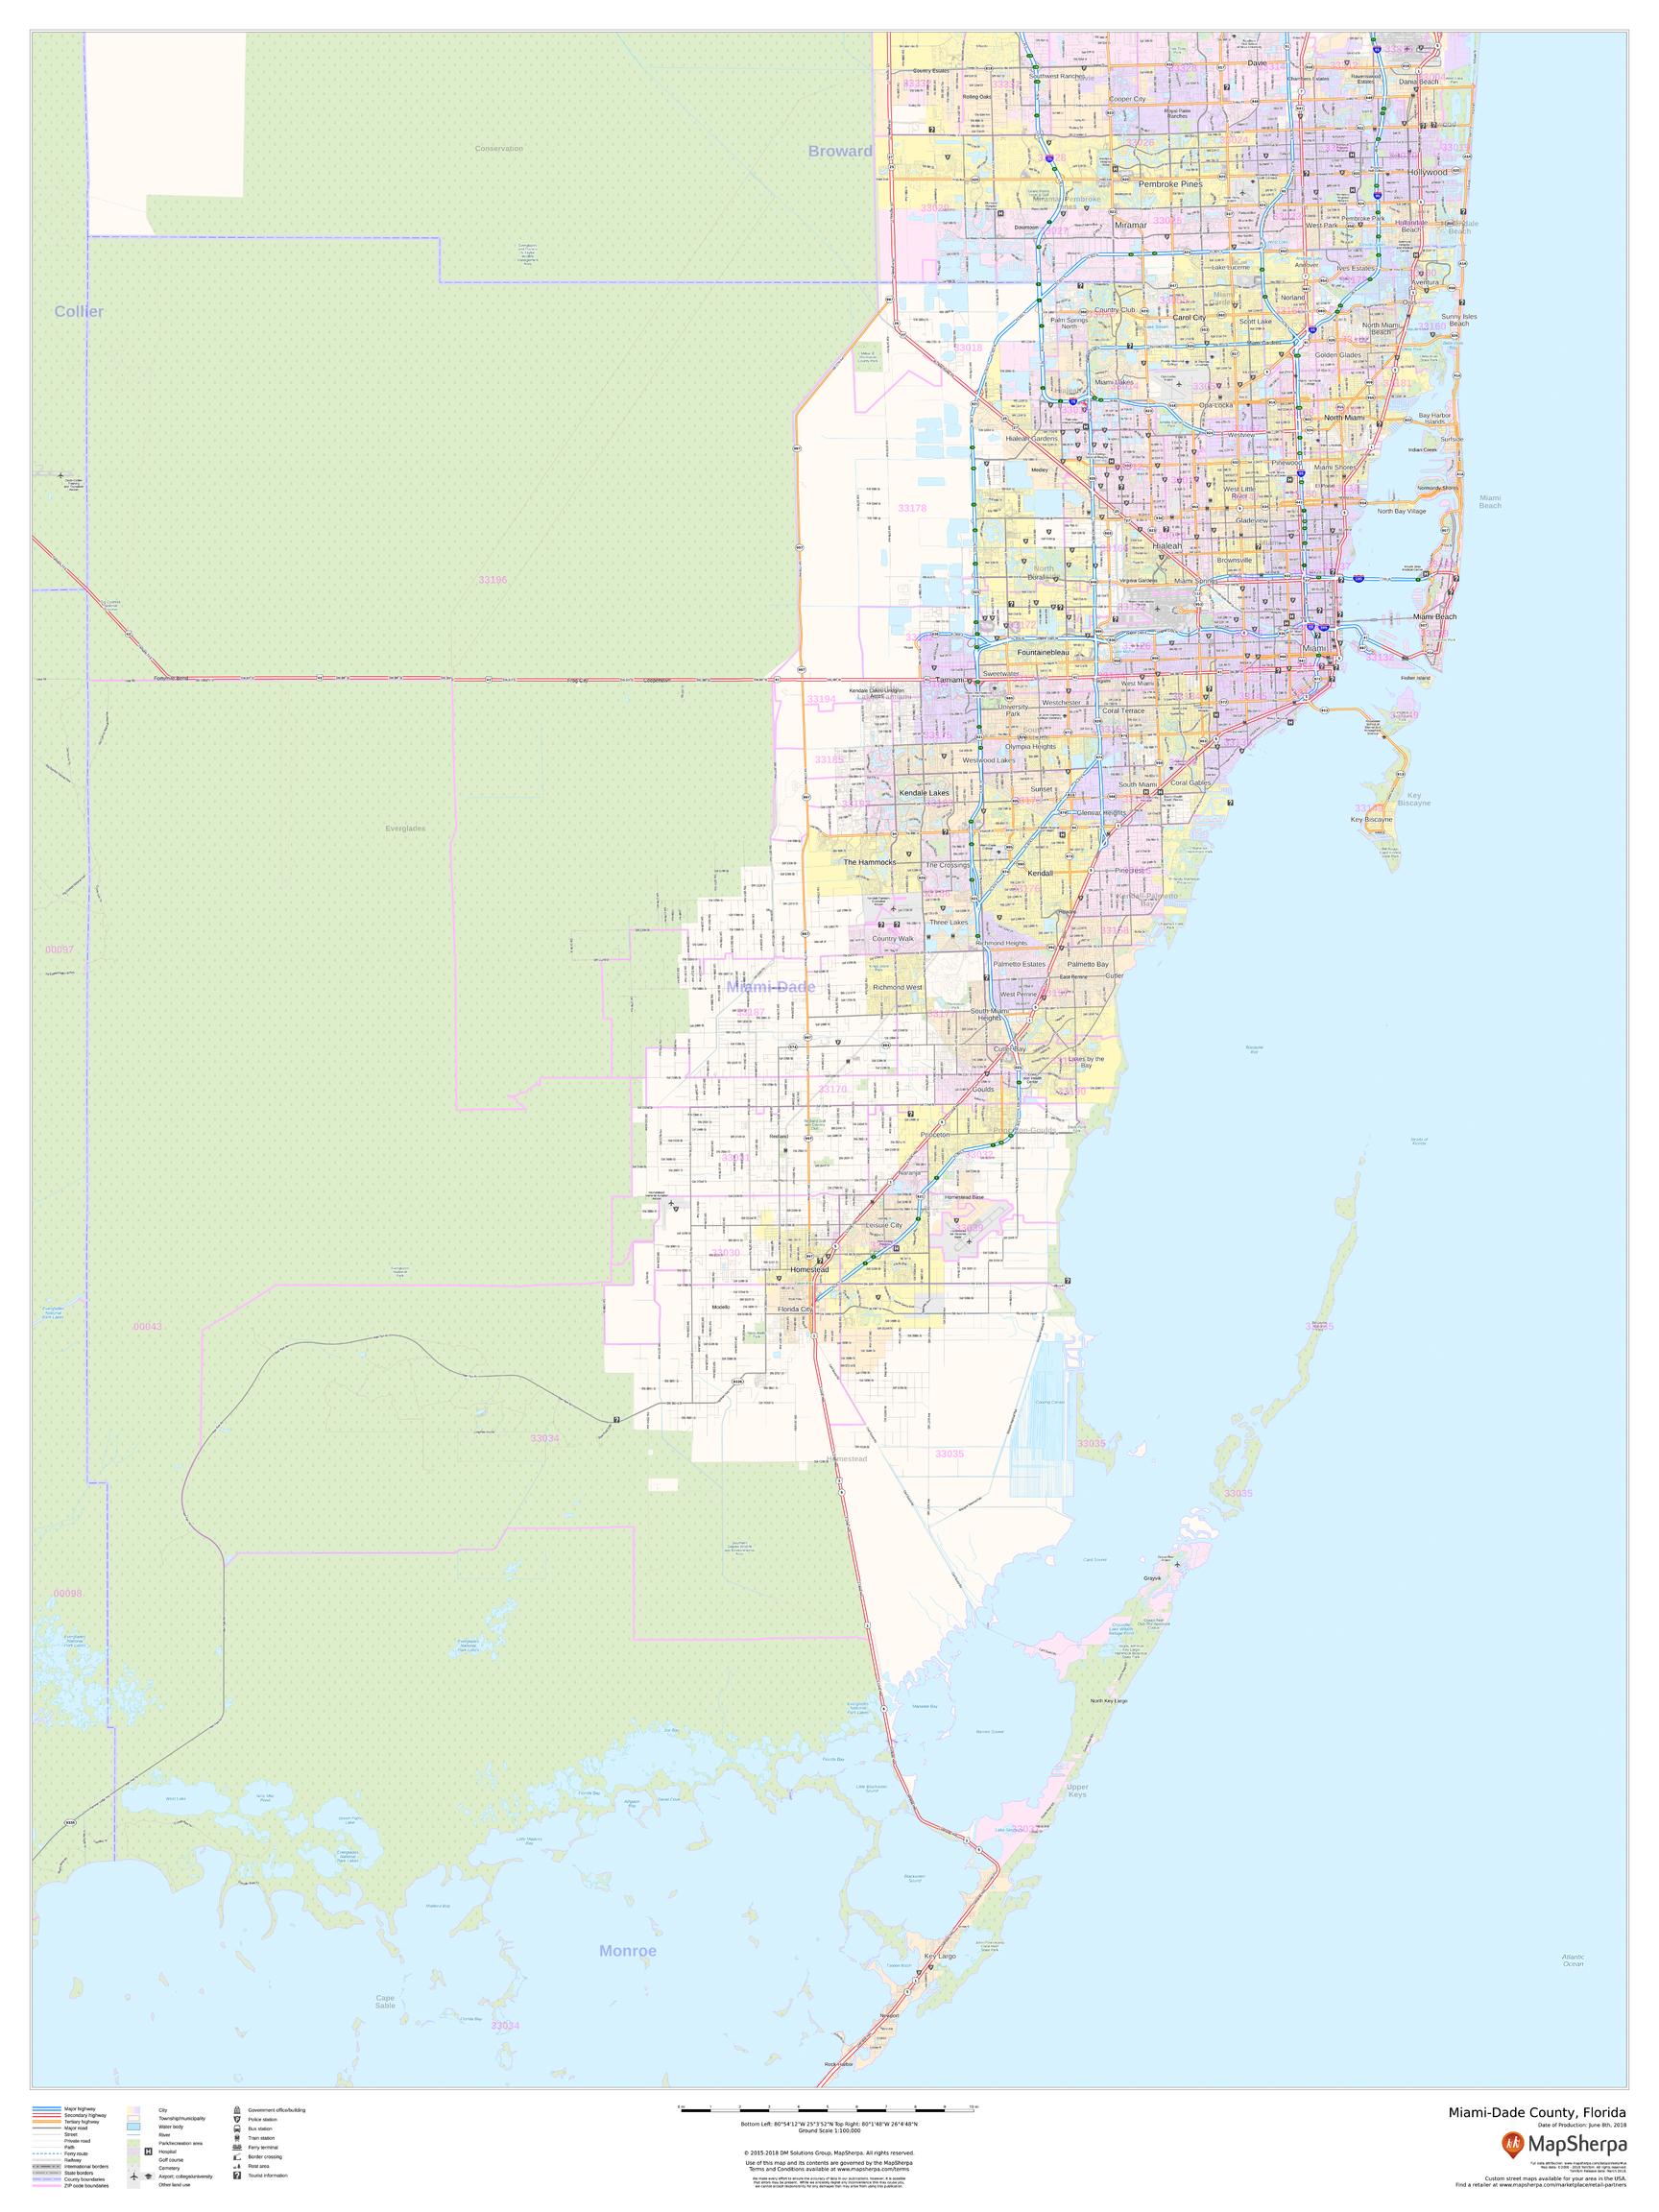 28 miami dade zip codes map - maps online for you